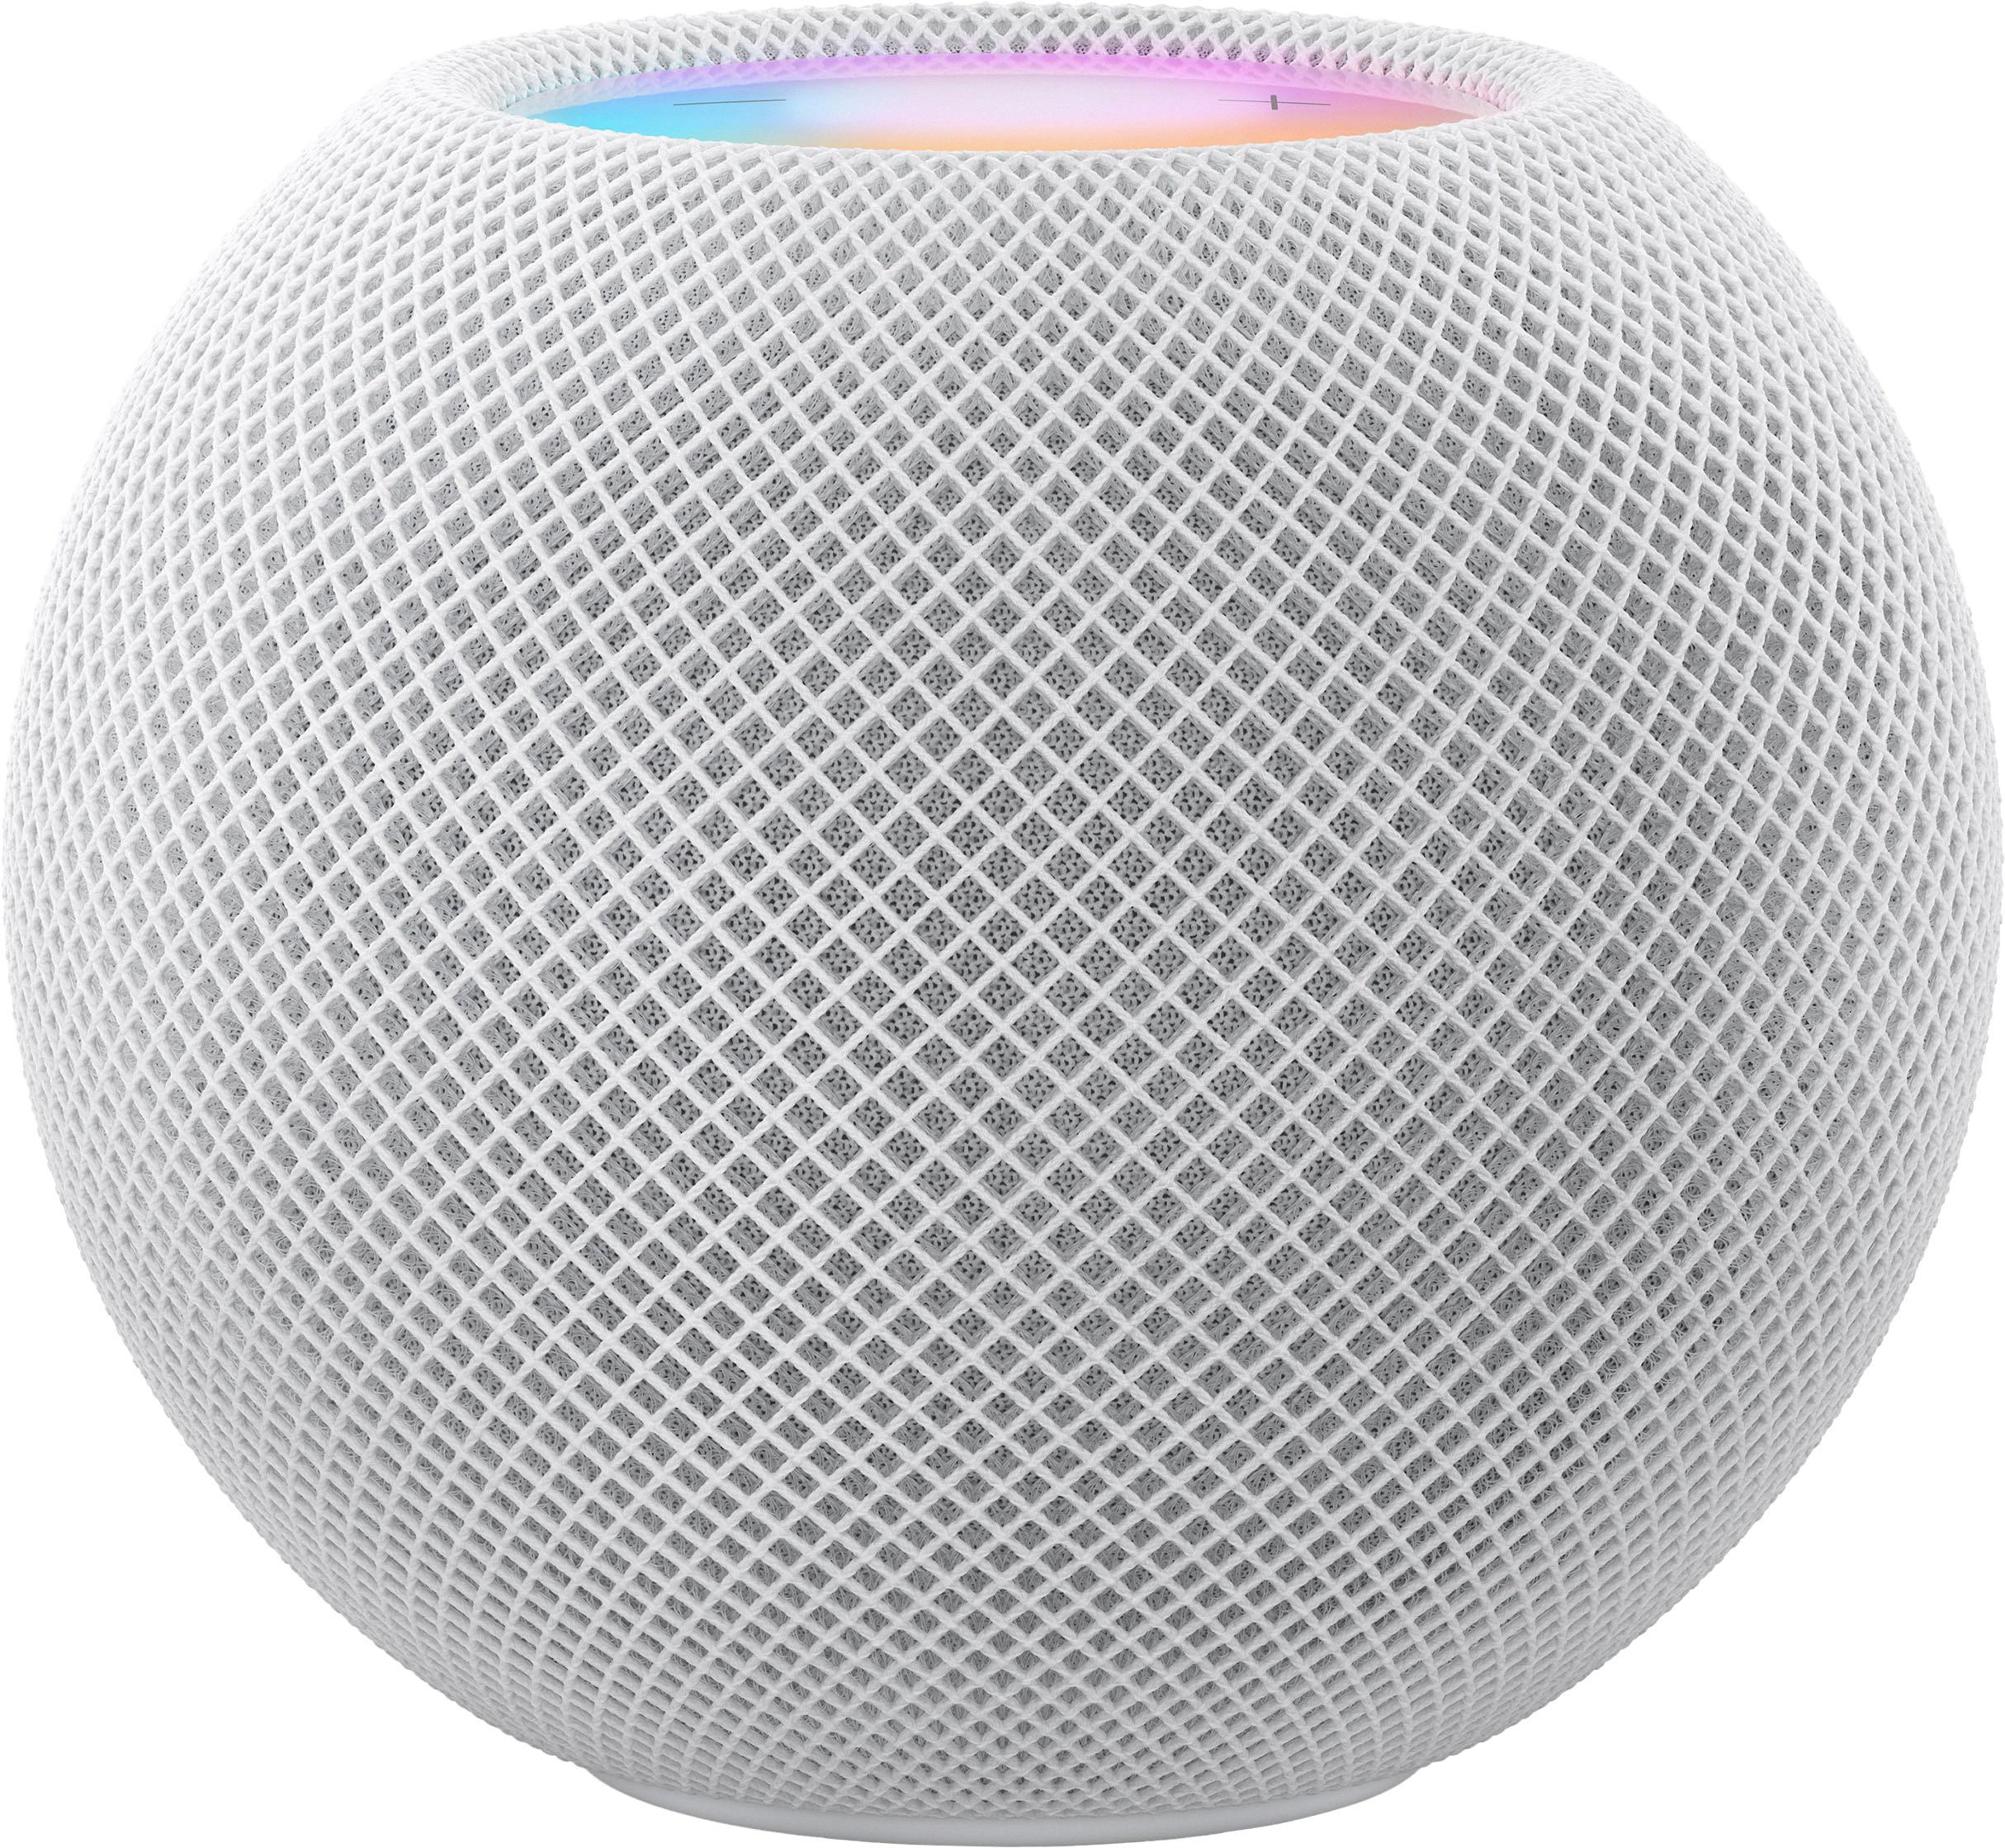 Can Two Users Access HomePod? 1